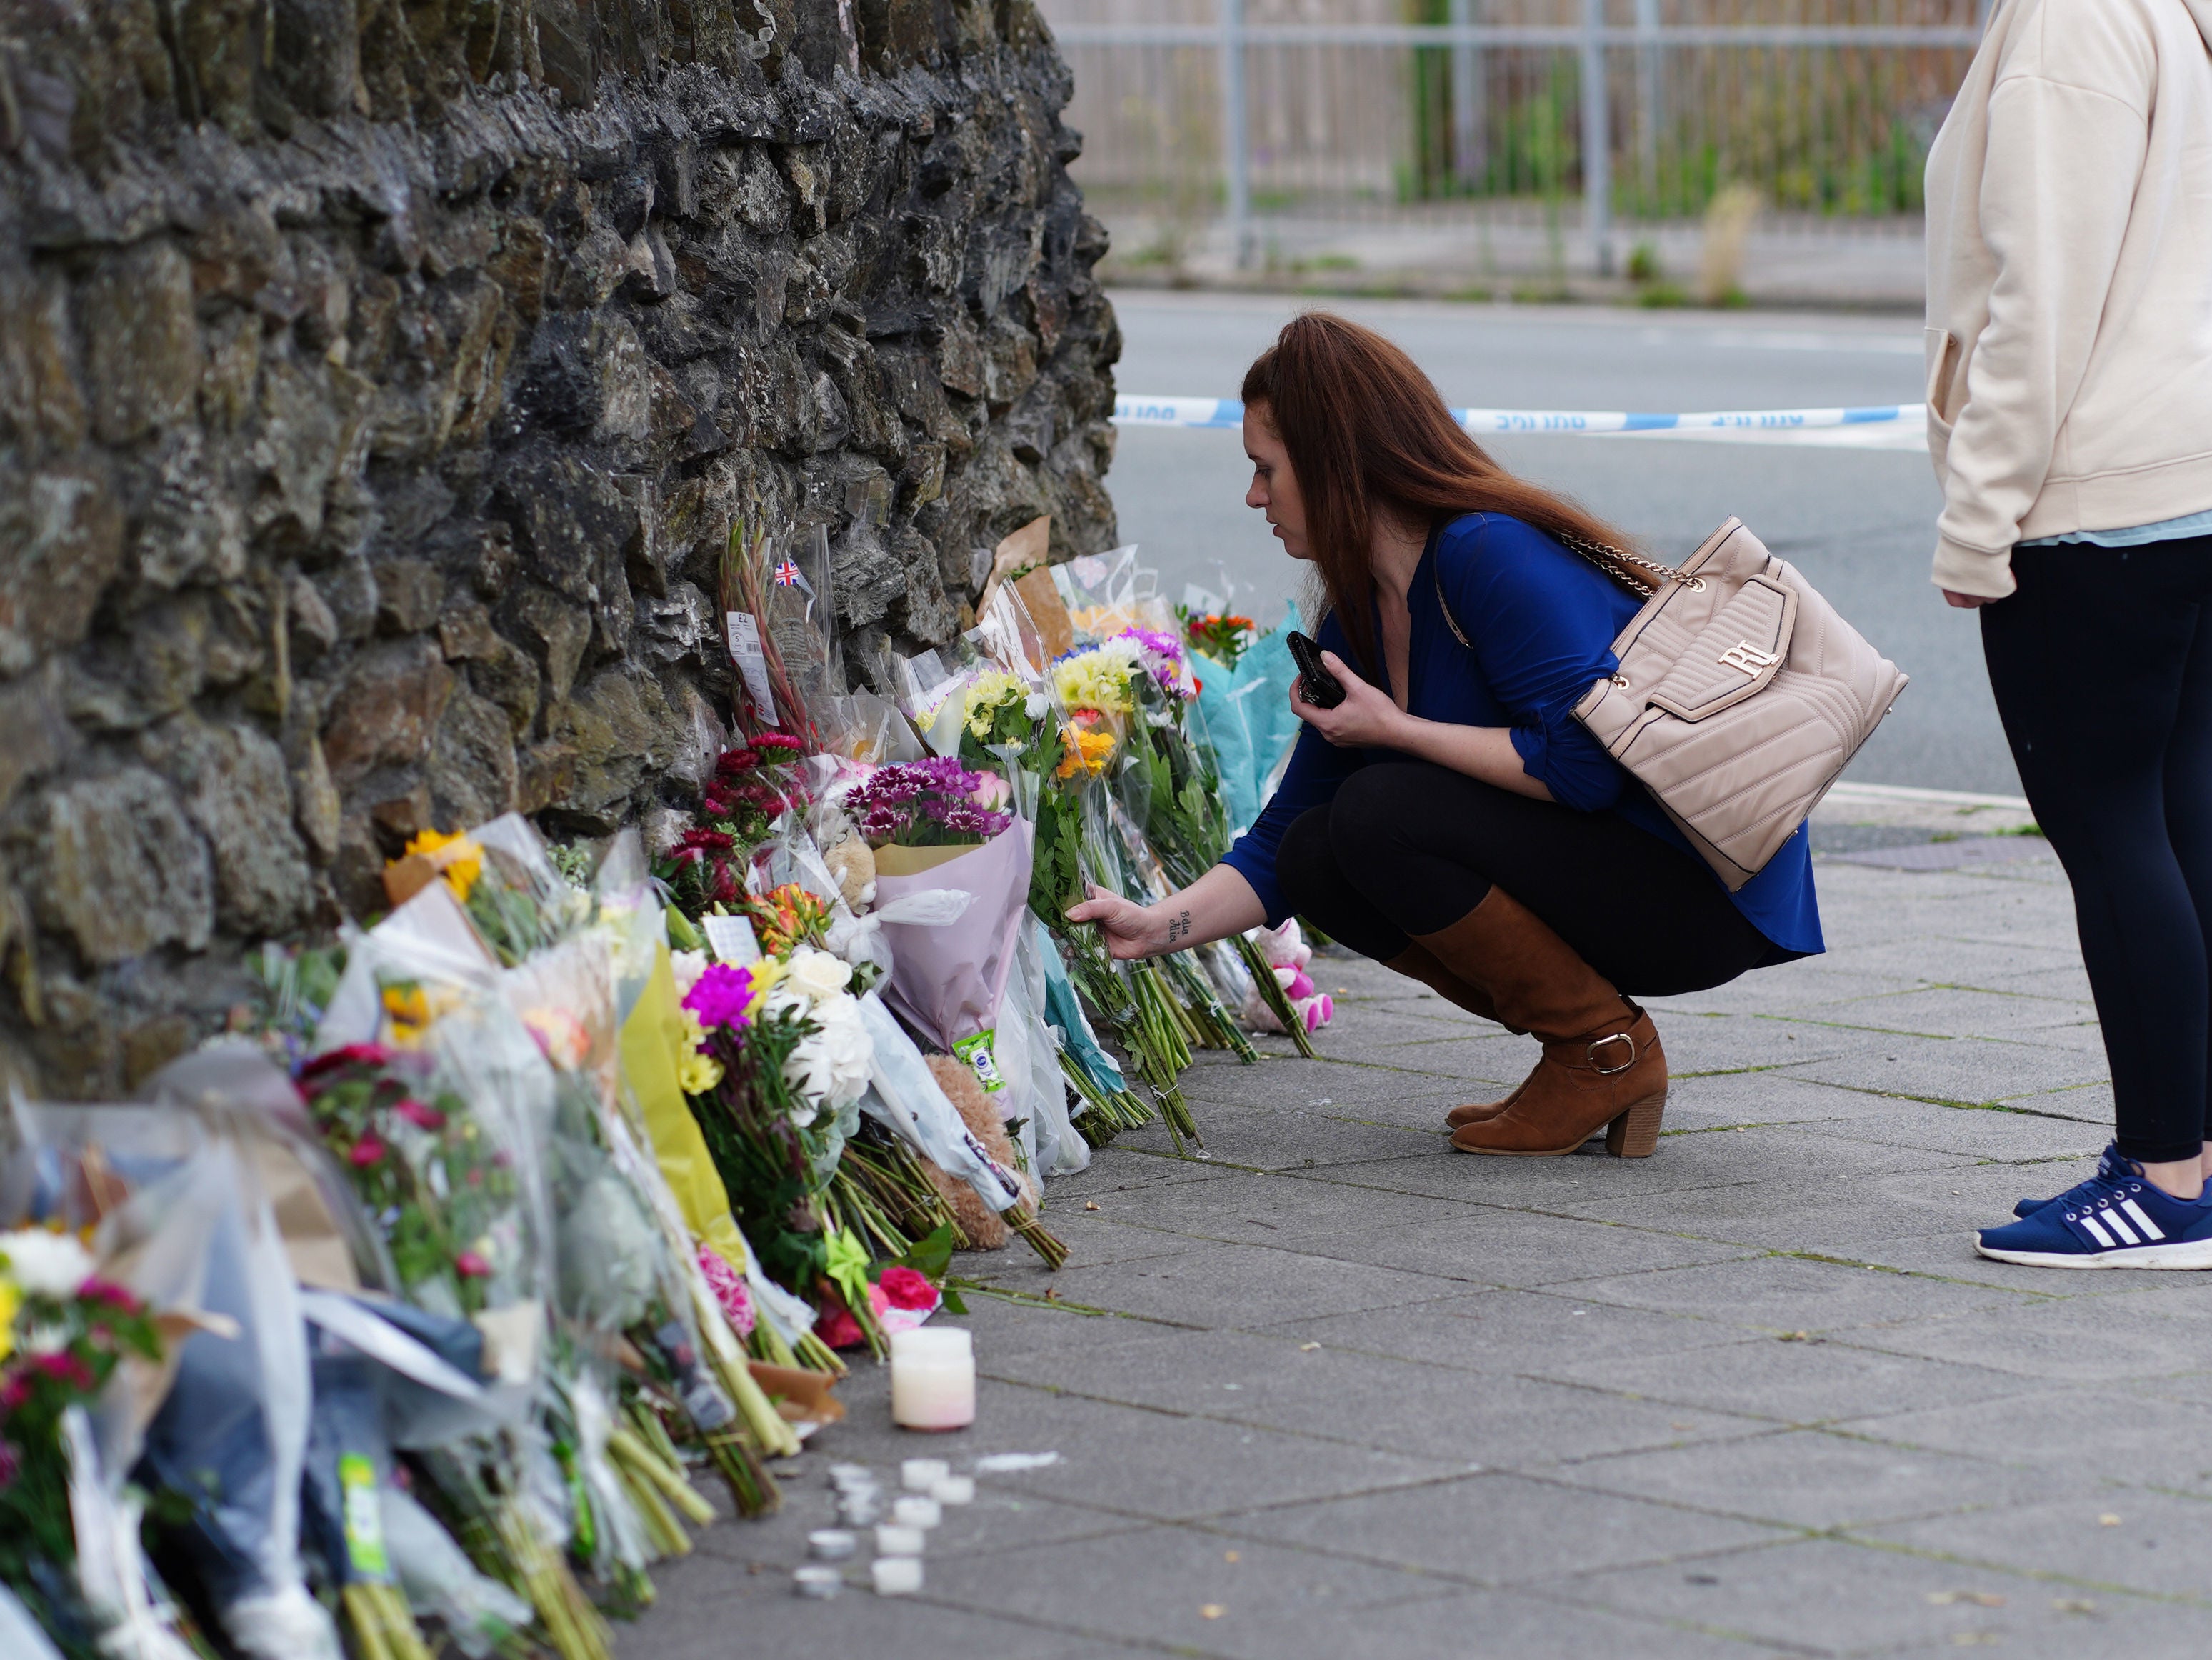 People leave flowers in the Keyham area of Plymouth where six people, including the offender, died of gunshot wounds